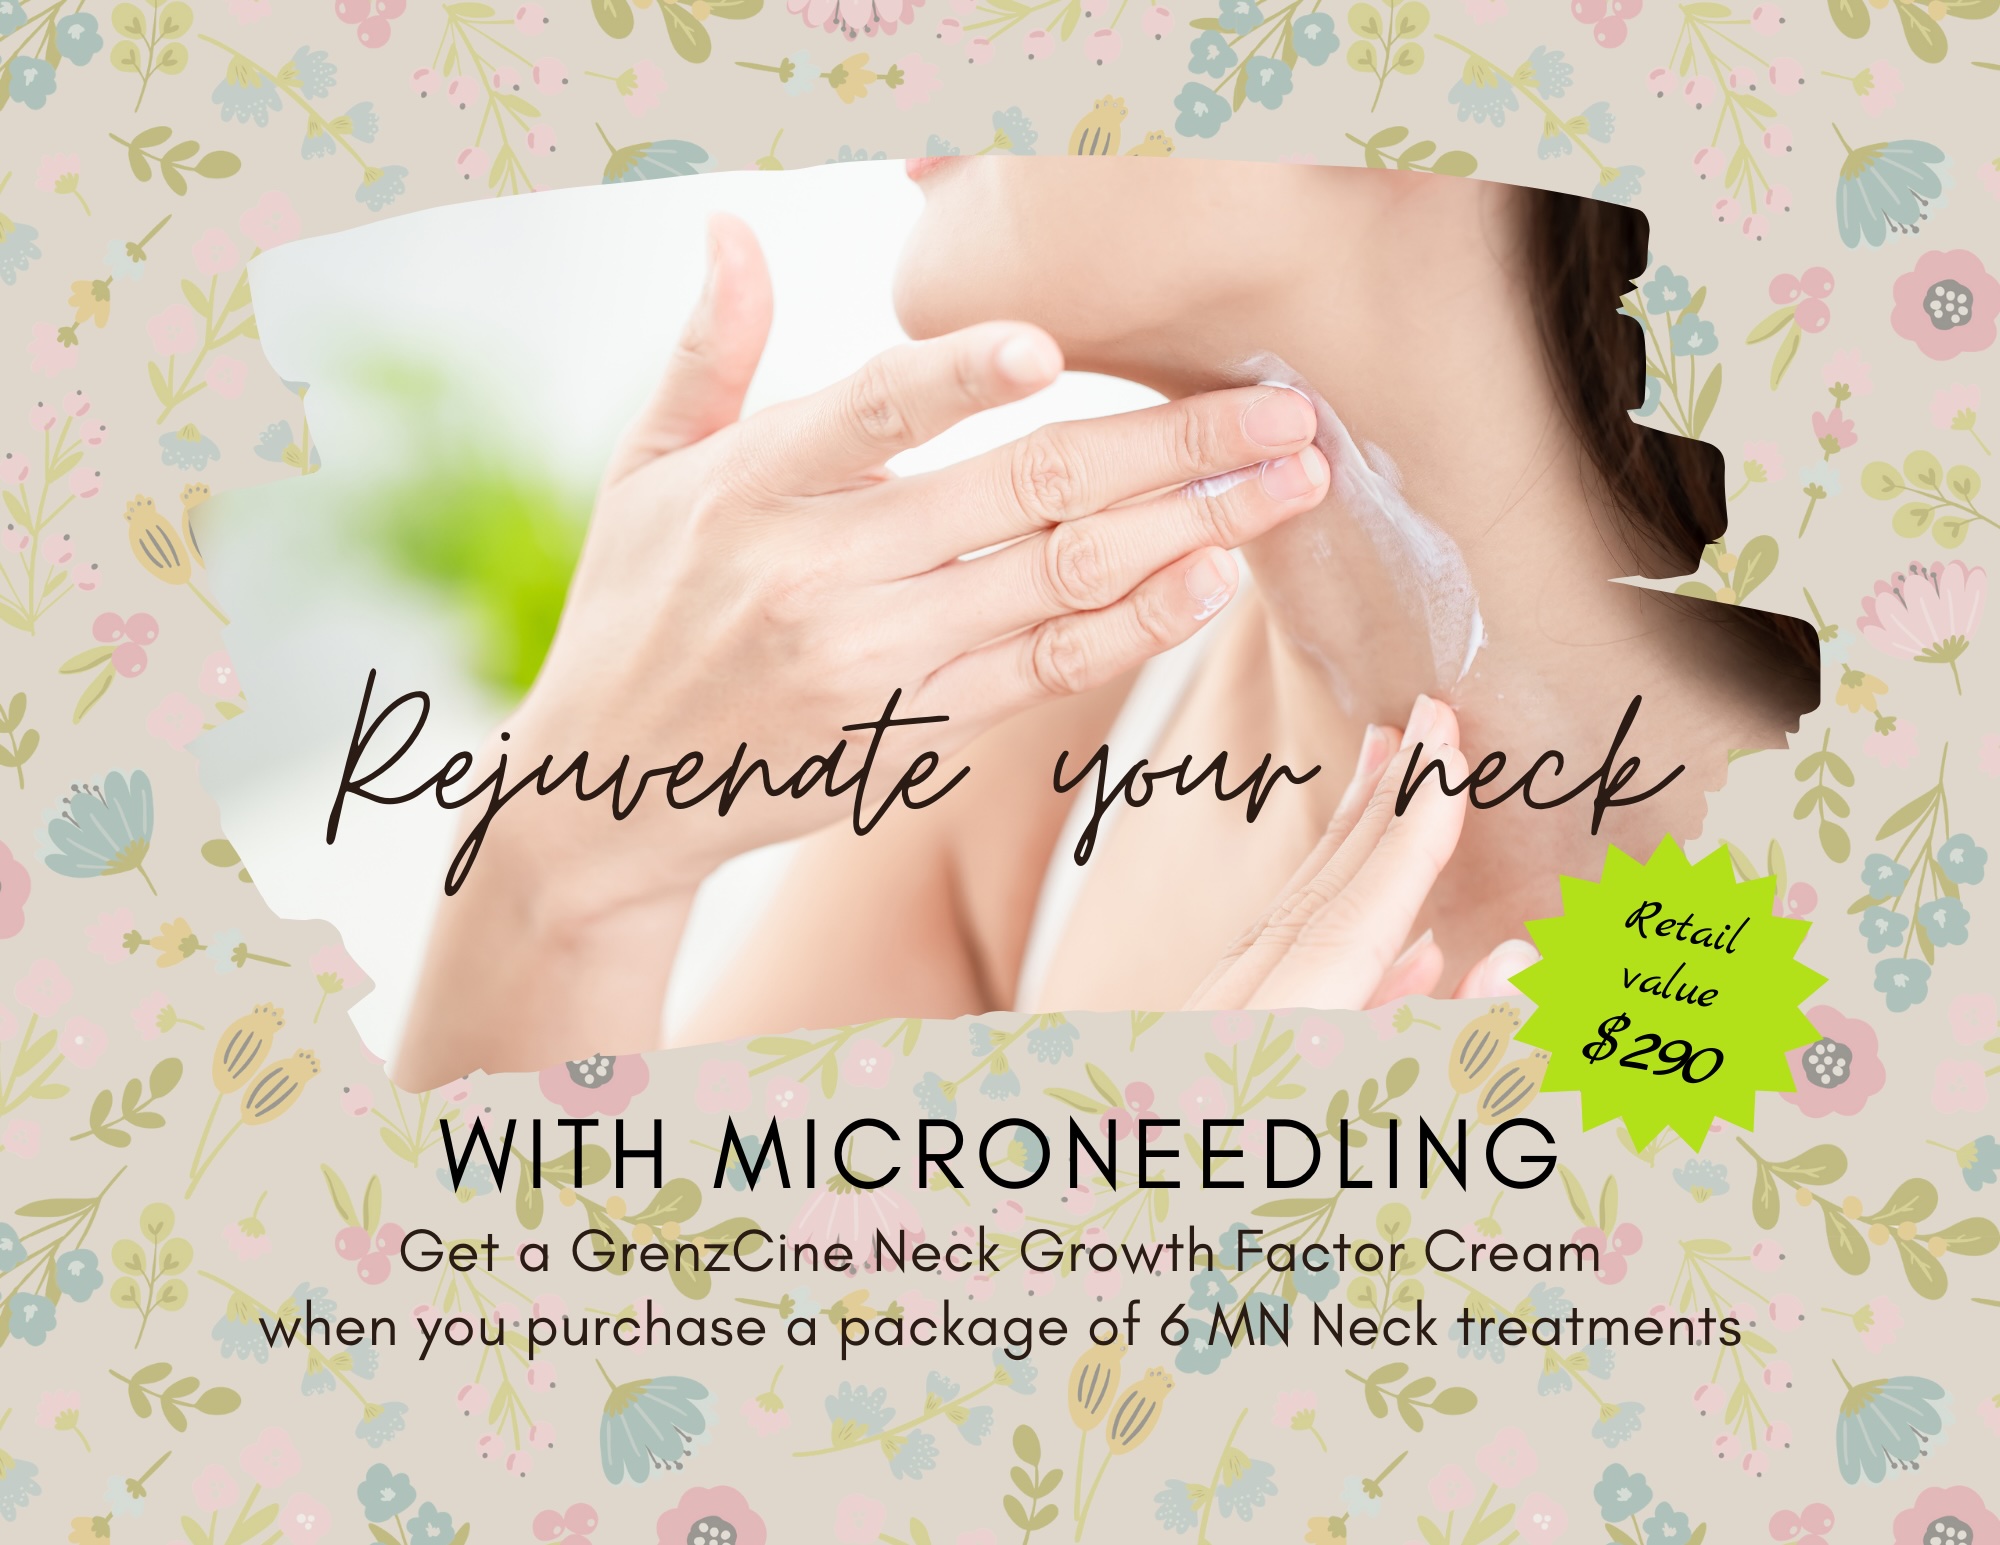 Rejuvenate your neck with microneedling. Get a GrenzCine Neck Growth Factor Cream when you purchase a package of 6 MN Neck treatments. $290 retail value.